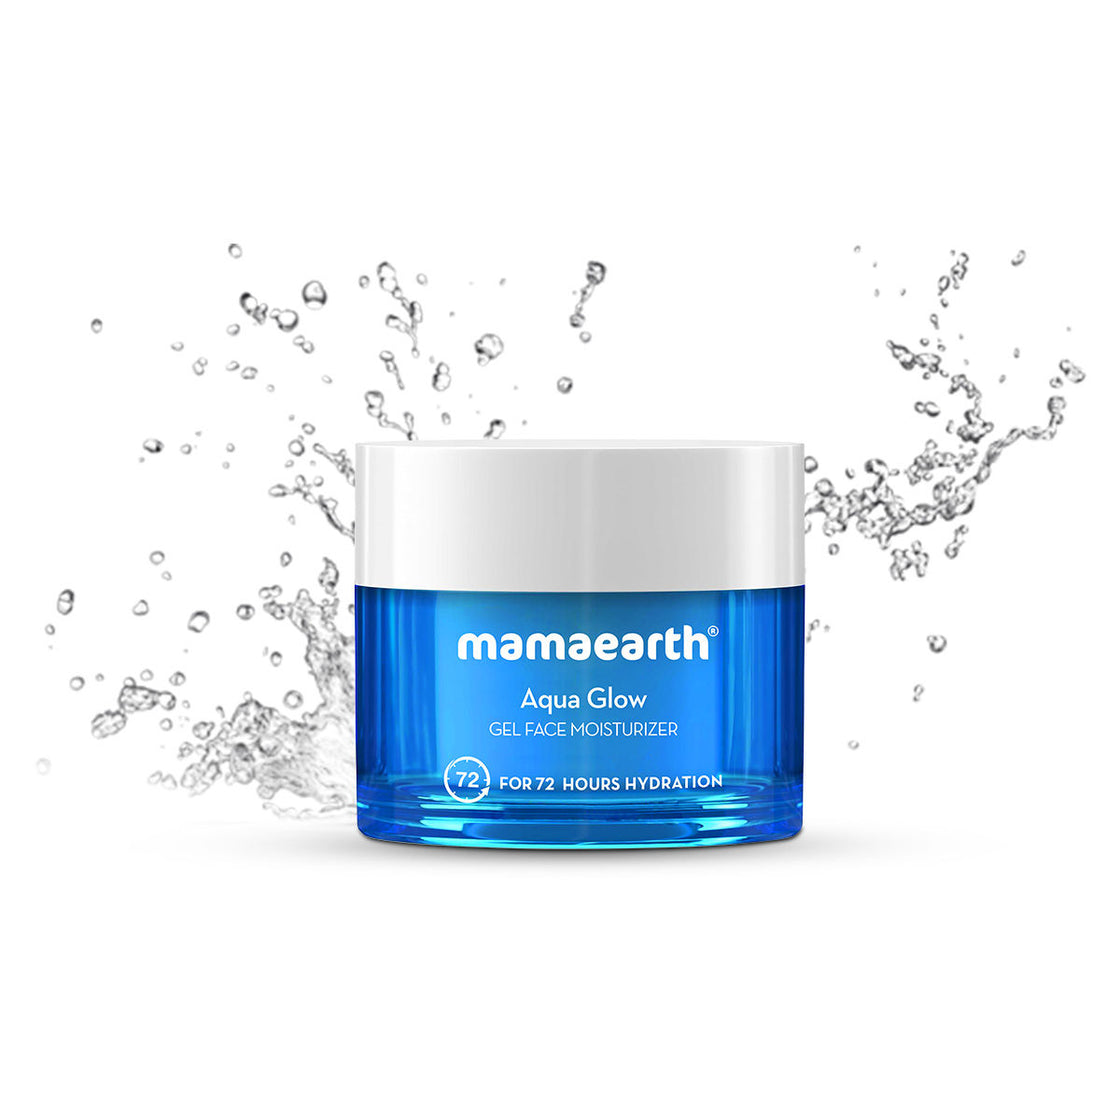 Mamaearth Aqua Glow Gel Face Moisturizer With Himalayan Thermal Water&Hyaluronic Acid For 72 Hours